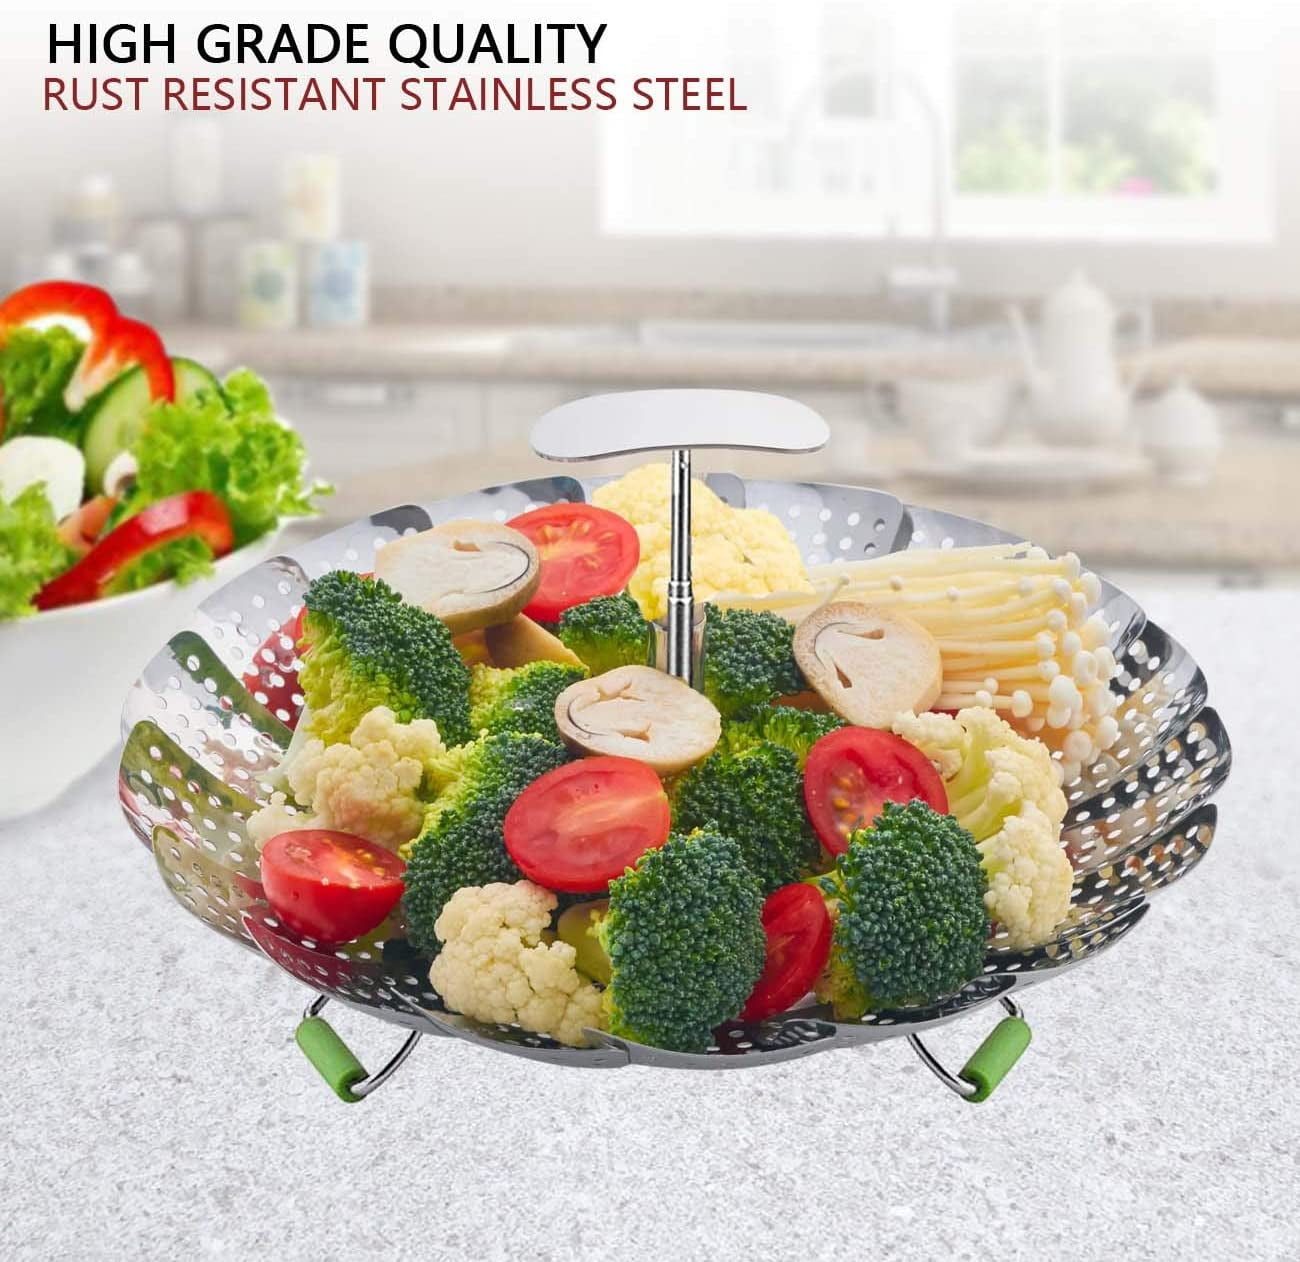 Consevisen Steamer Basket Stainless Steel Vegetable Steamer Basket Folding Steamer Insert for Veggie Fish Seafood Cooking Expandable